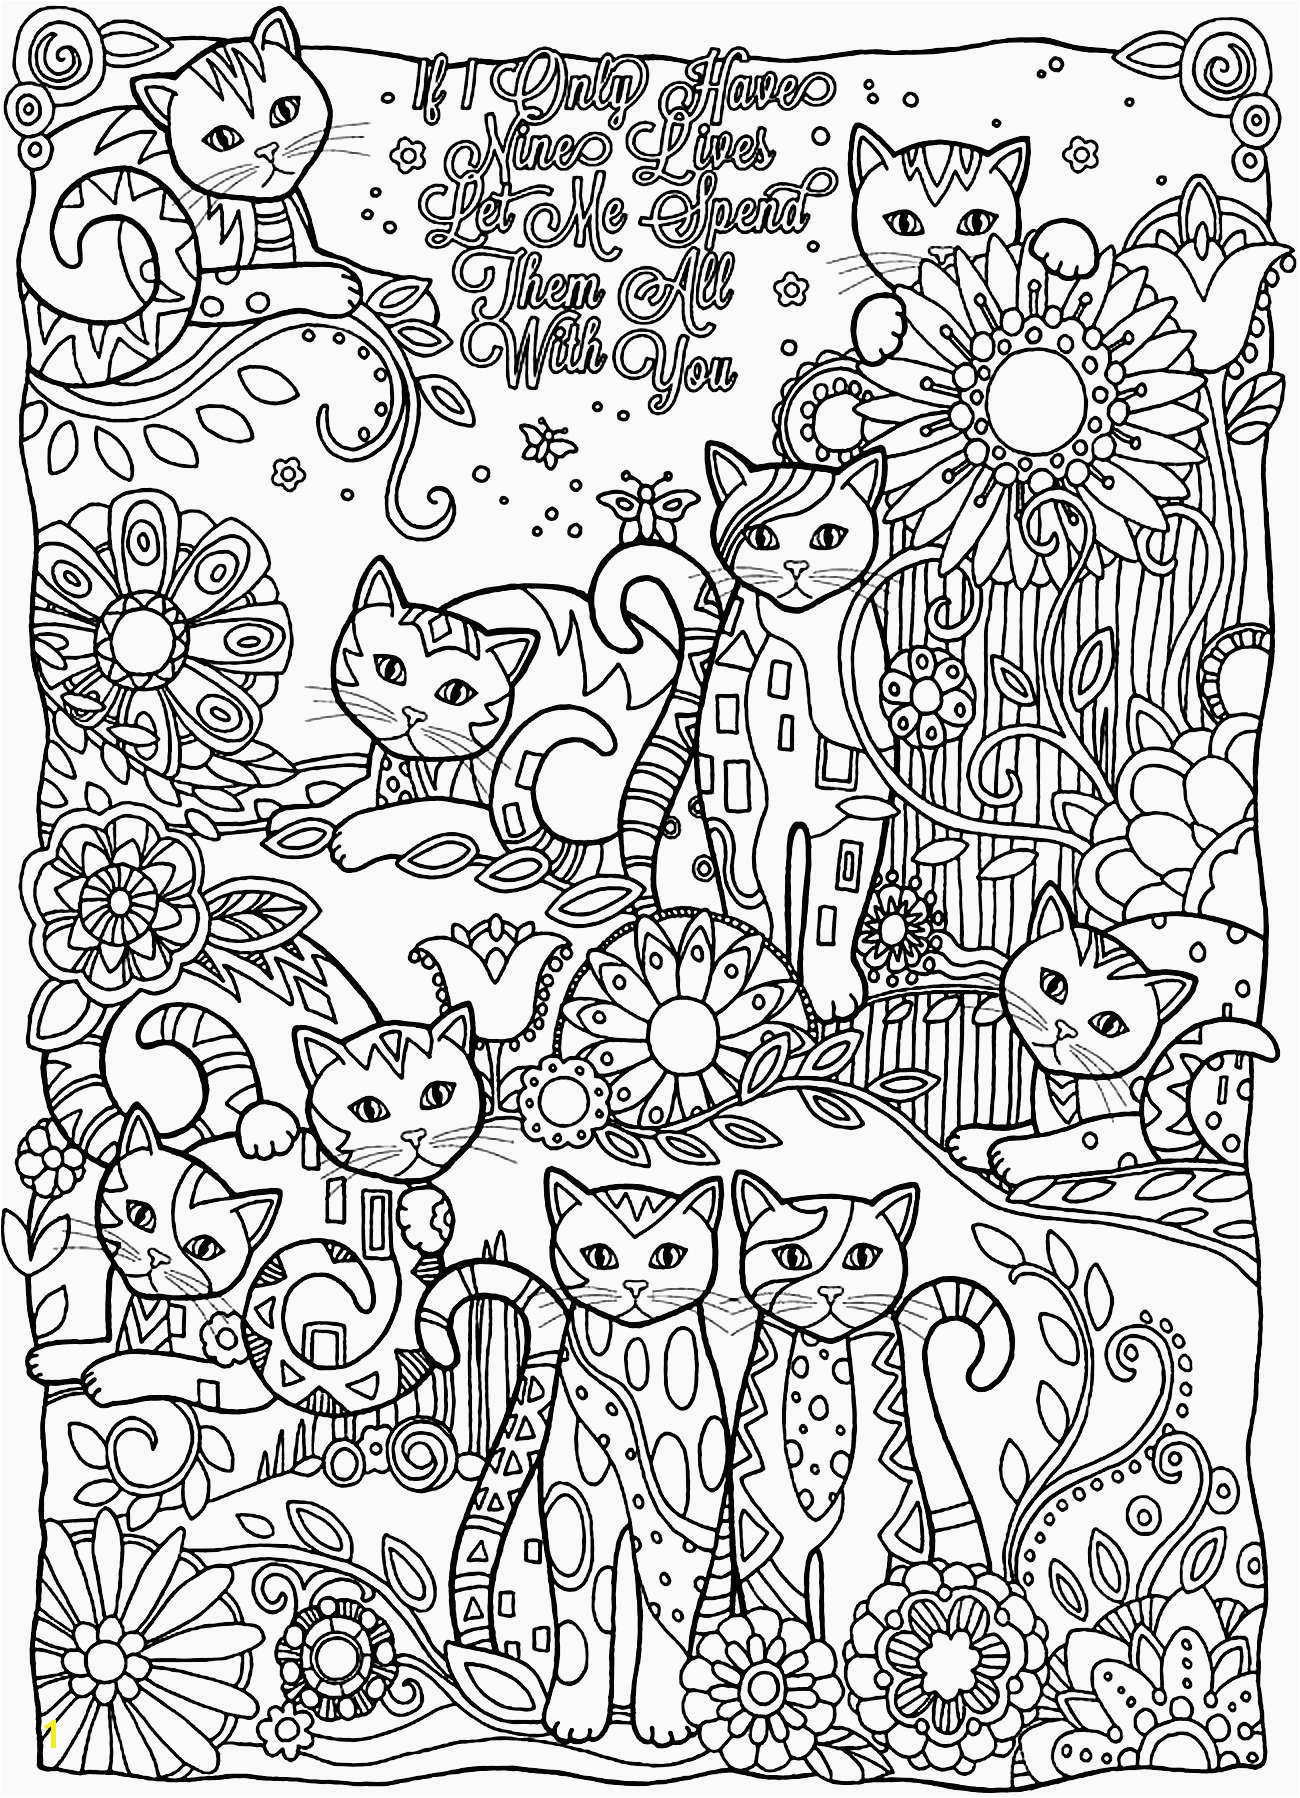 Www Free Coloring Pages Com Thanksgiving 21 Jesus as A Boy Coloring Pages Free